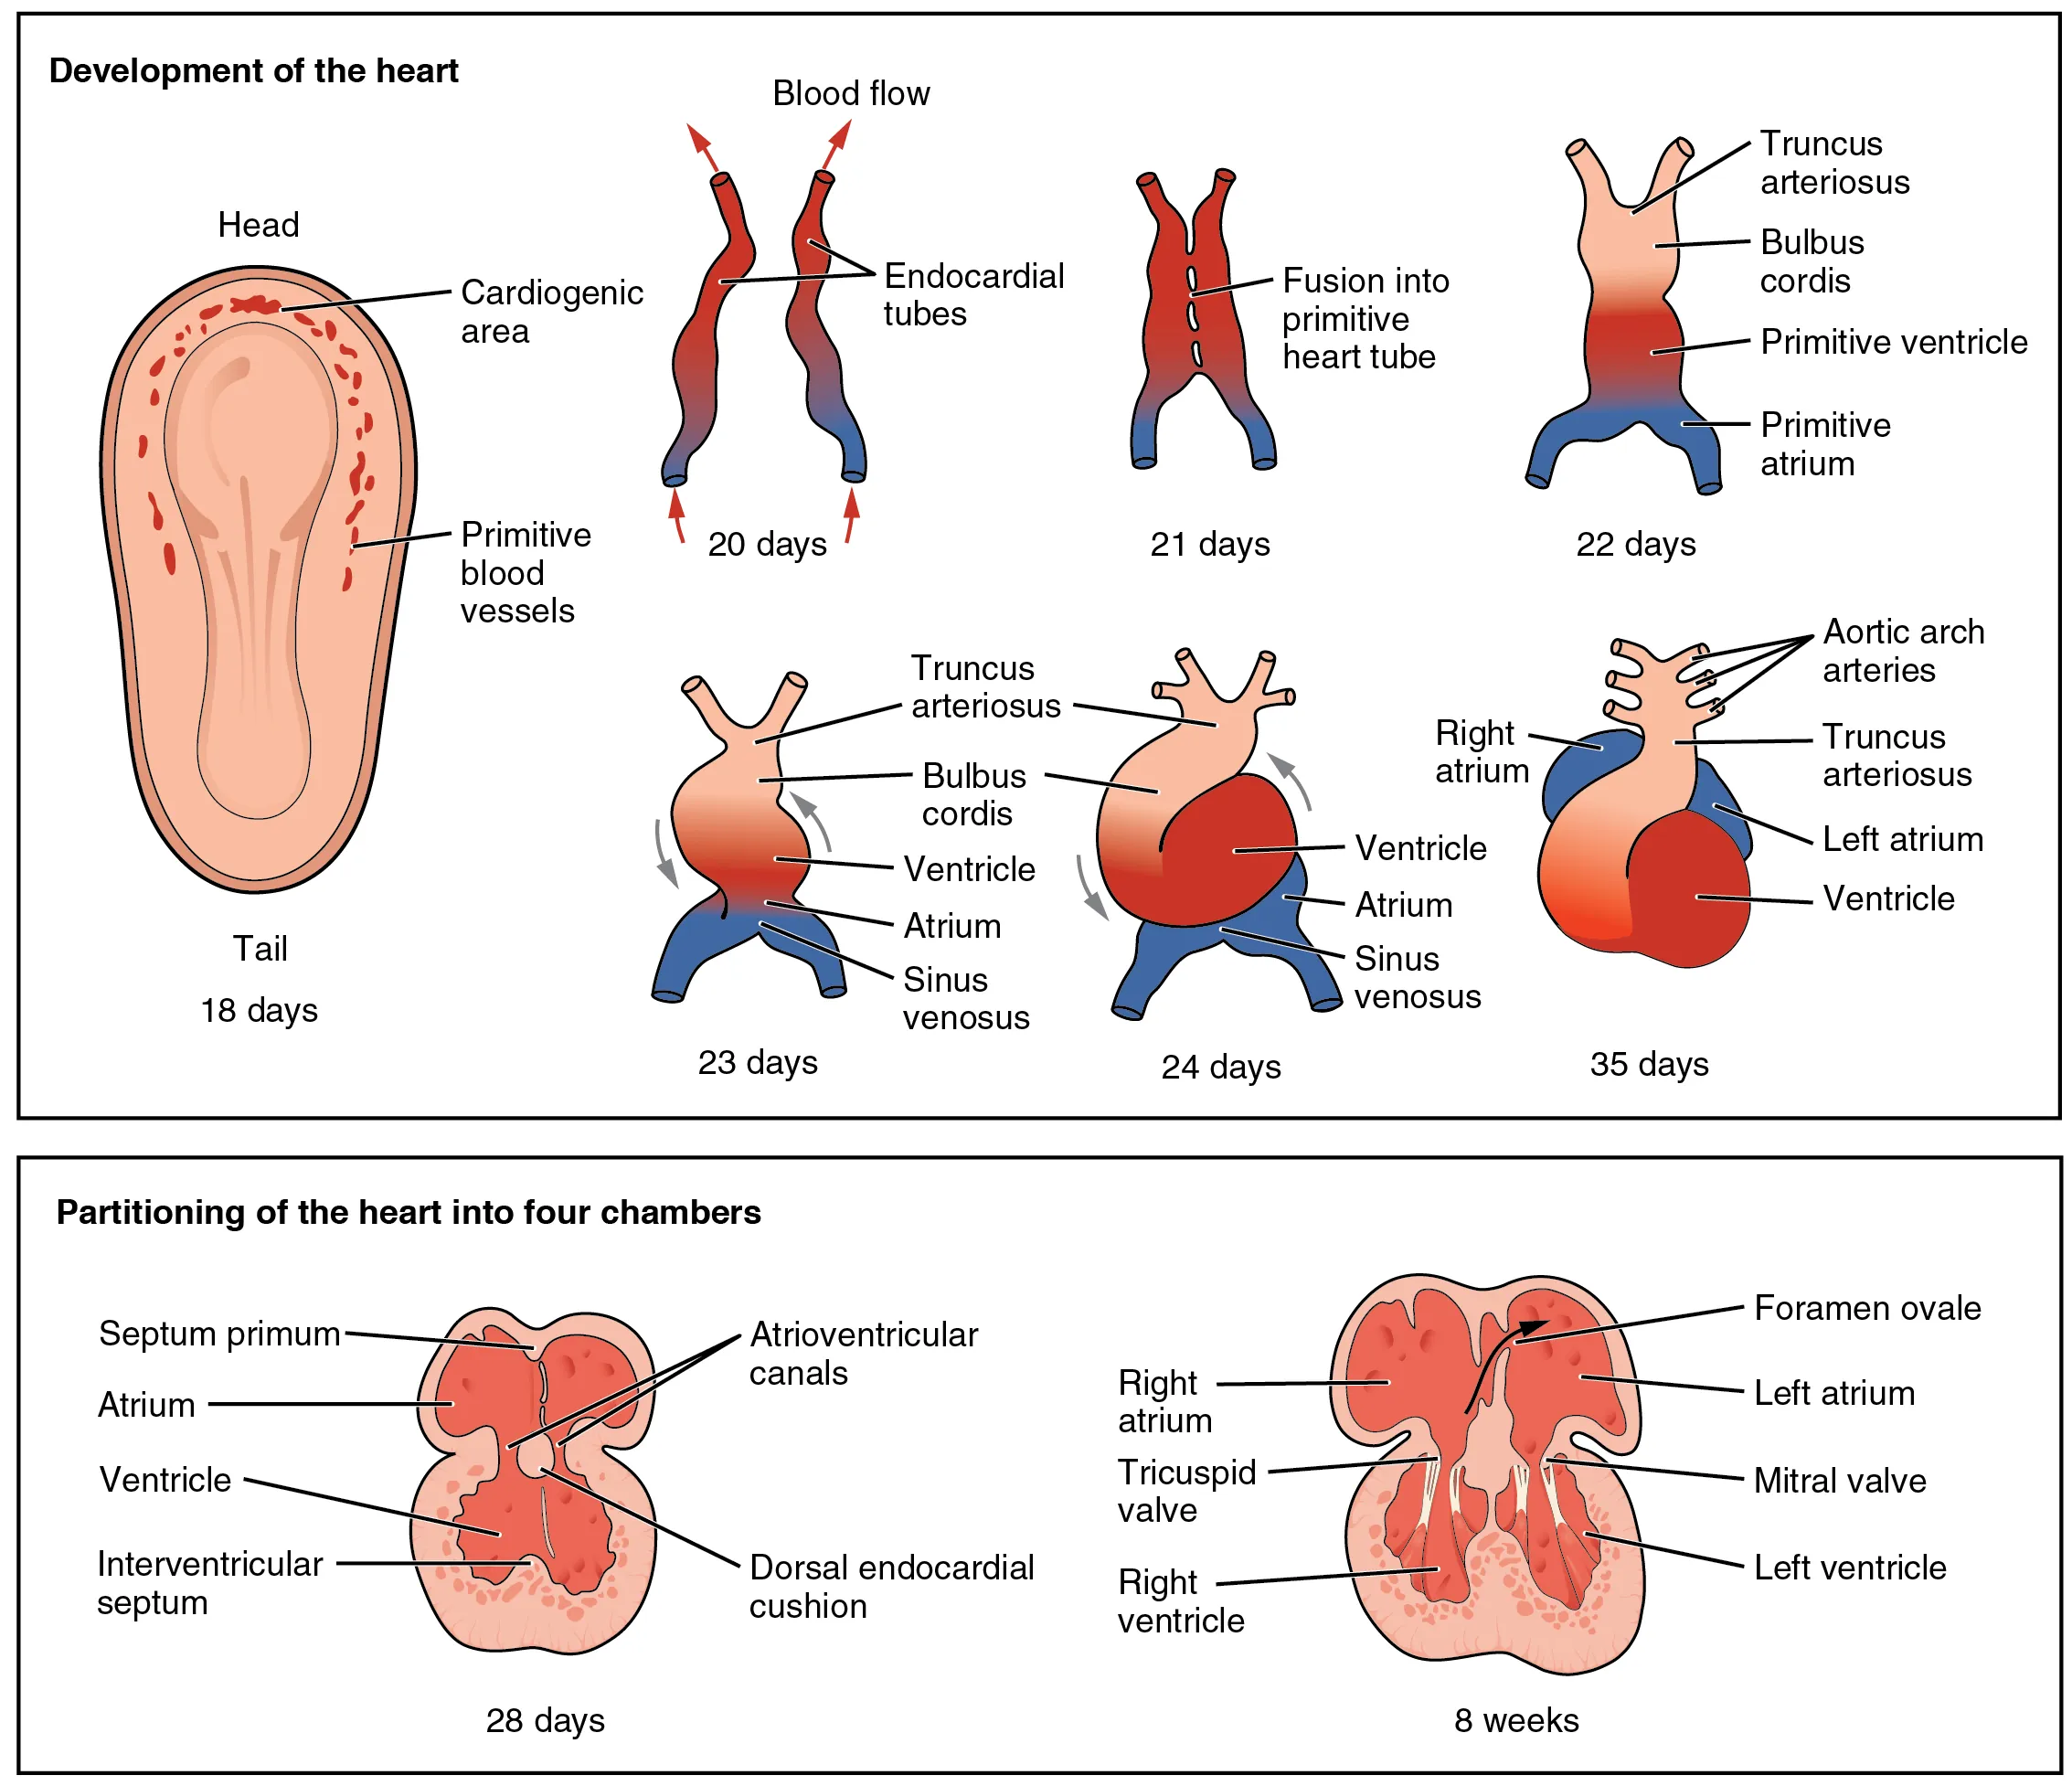 In the top panel of this figure the different stages in the development of the heart in the embryo is shown. The bottom panel shows how the heart is partitioned into four chambers.